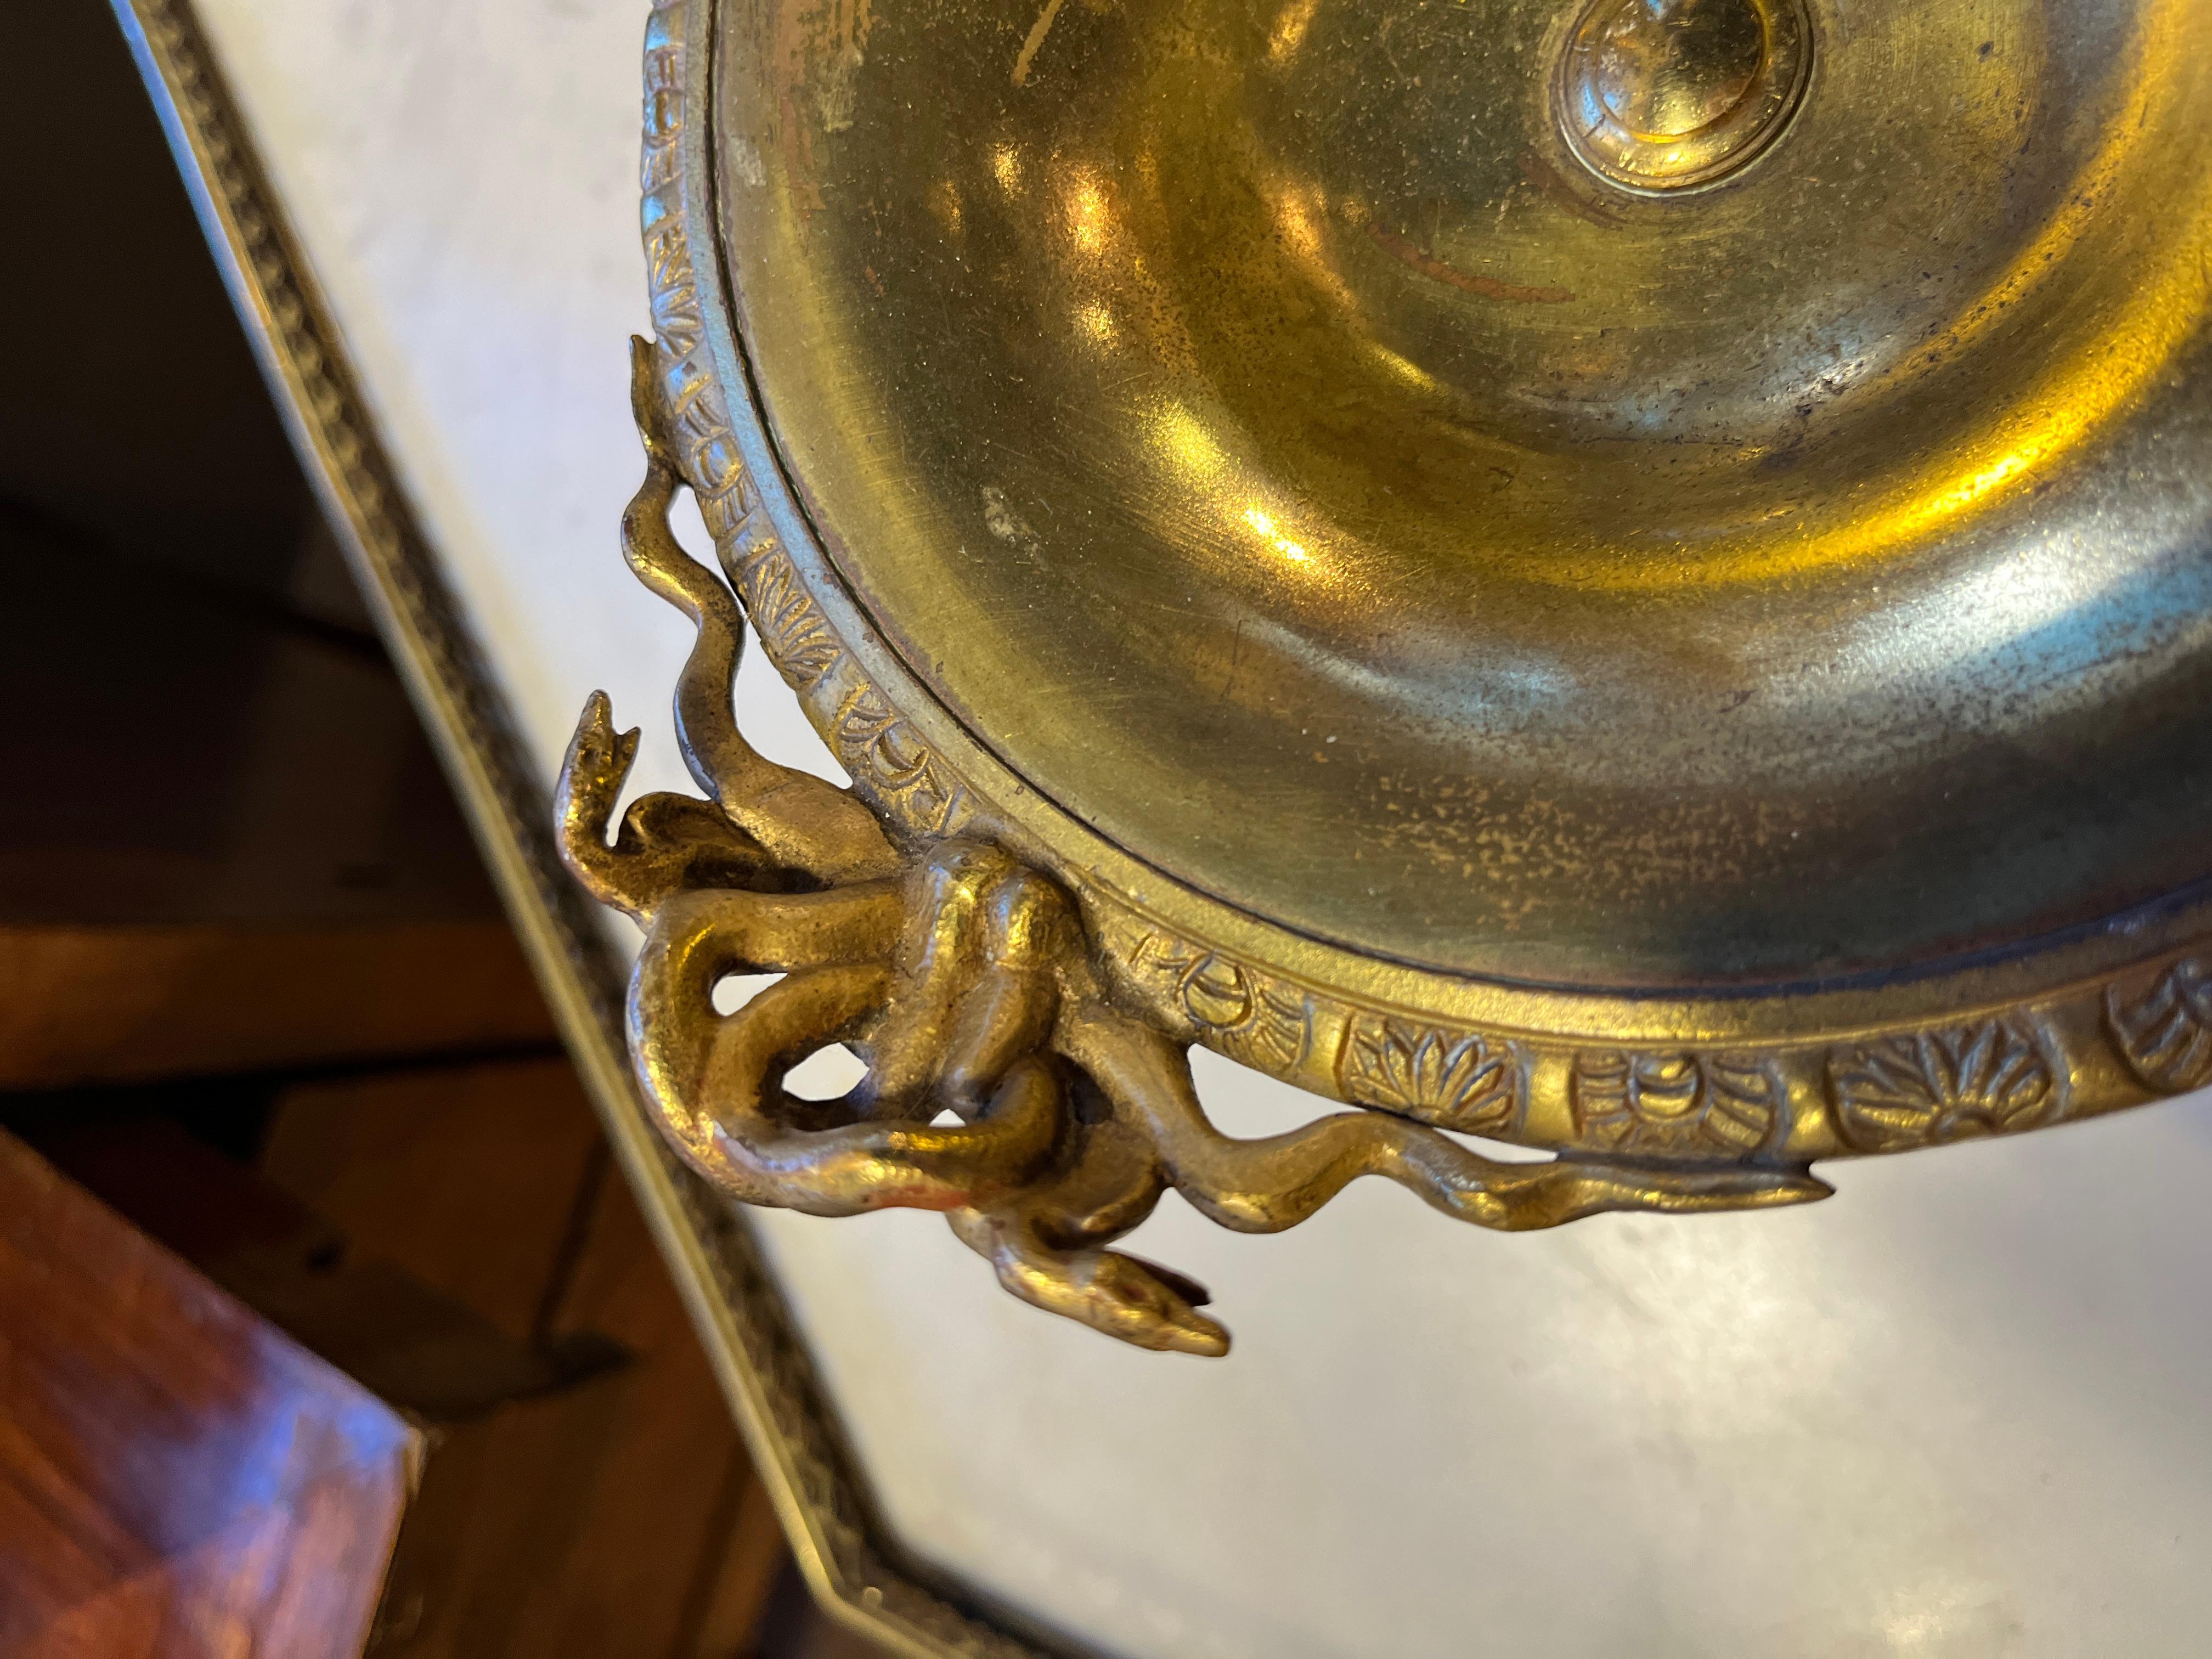 French Pair of Tazza Cobra Detail. Gorgeous detailing, see photos.